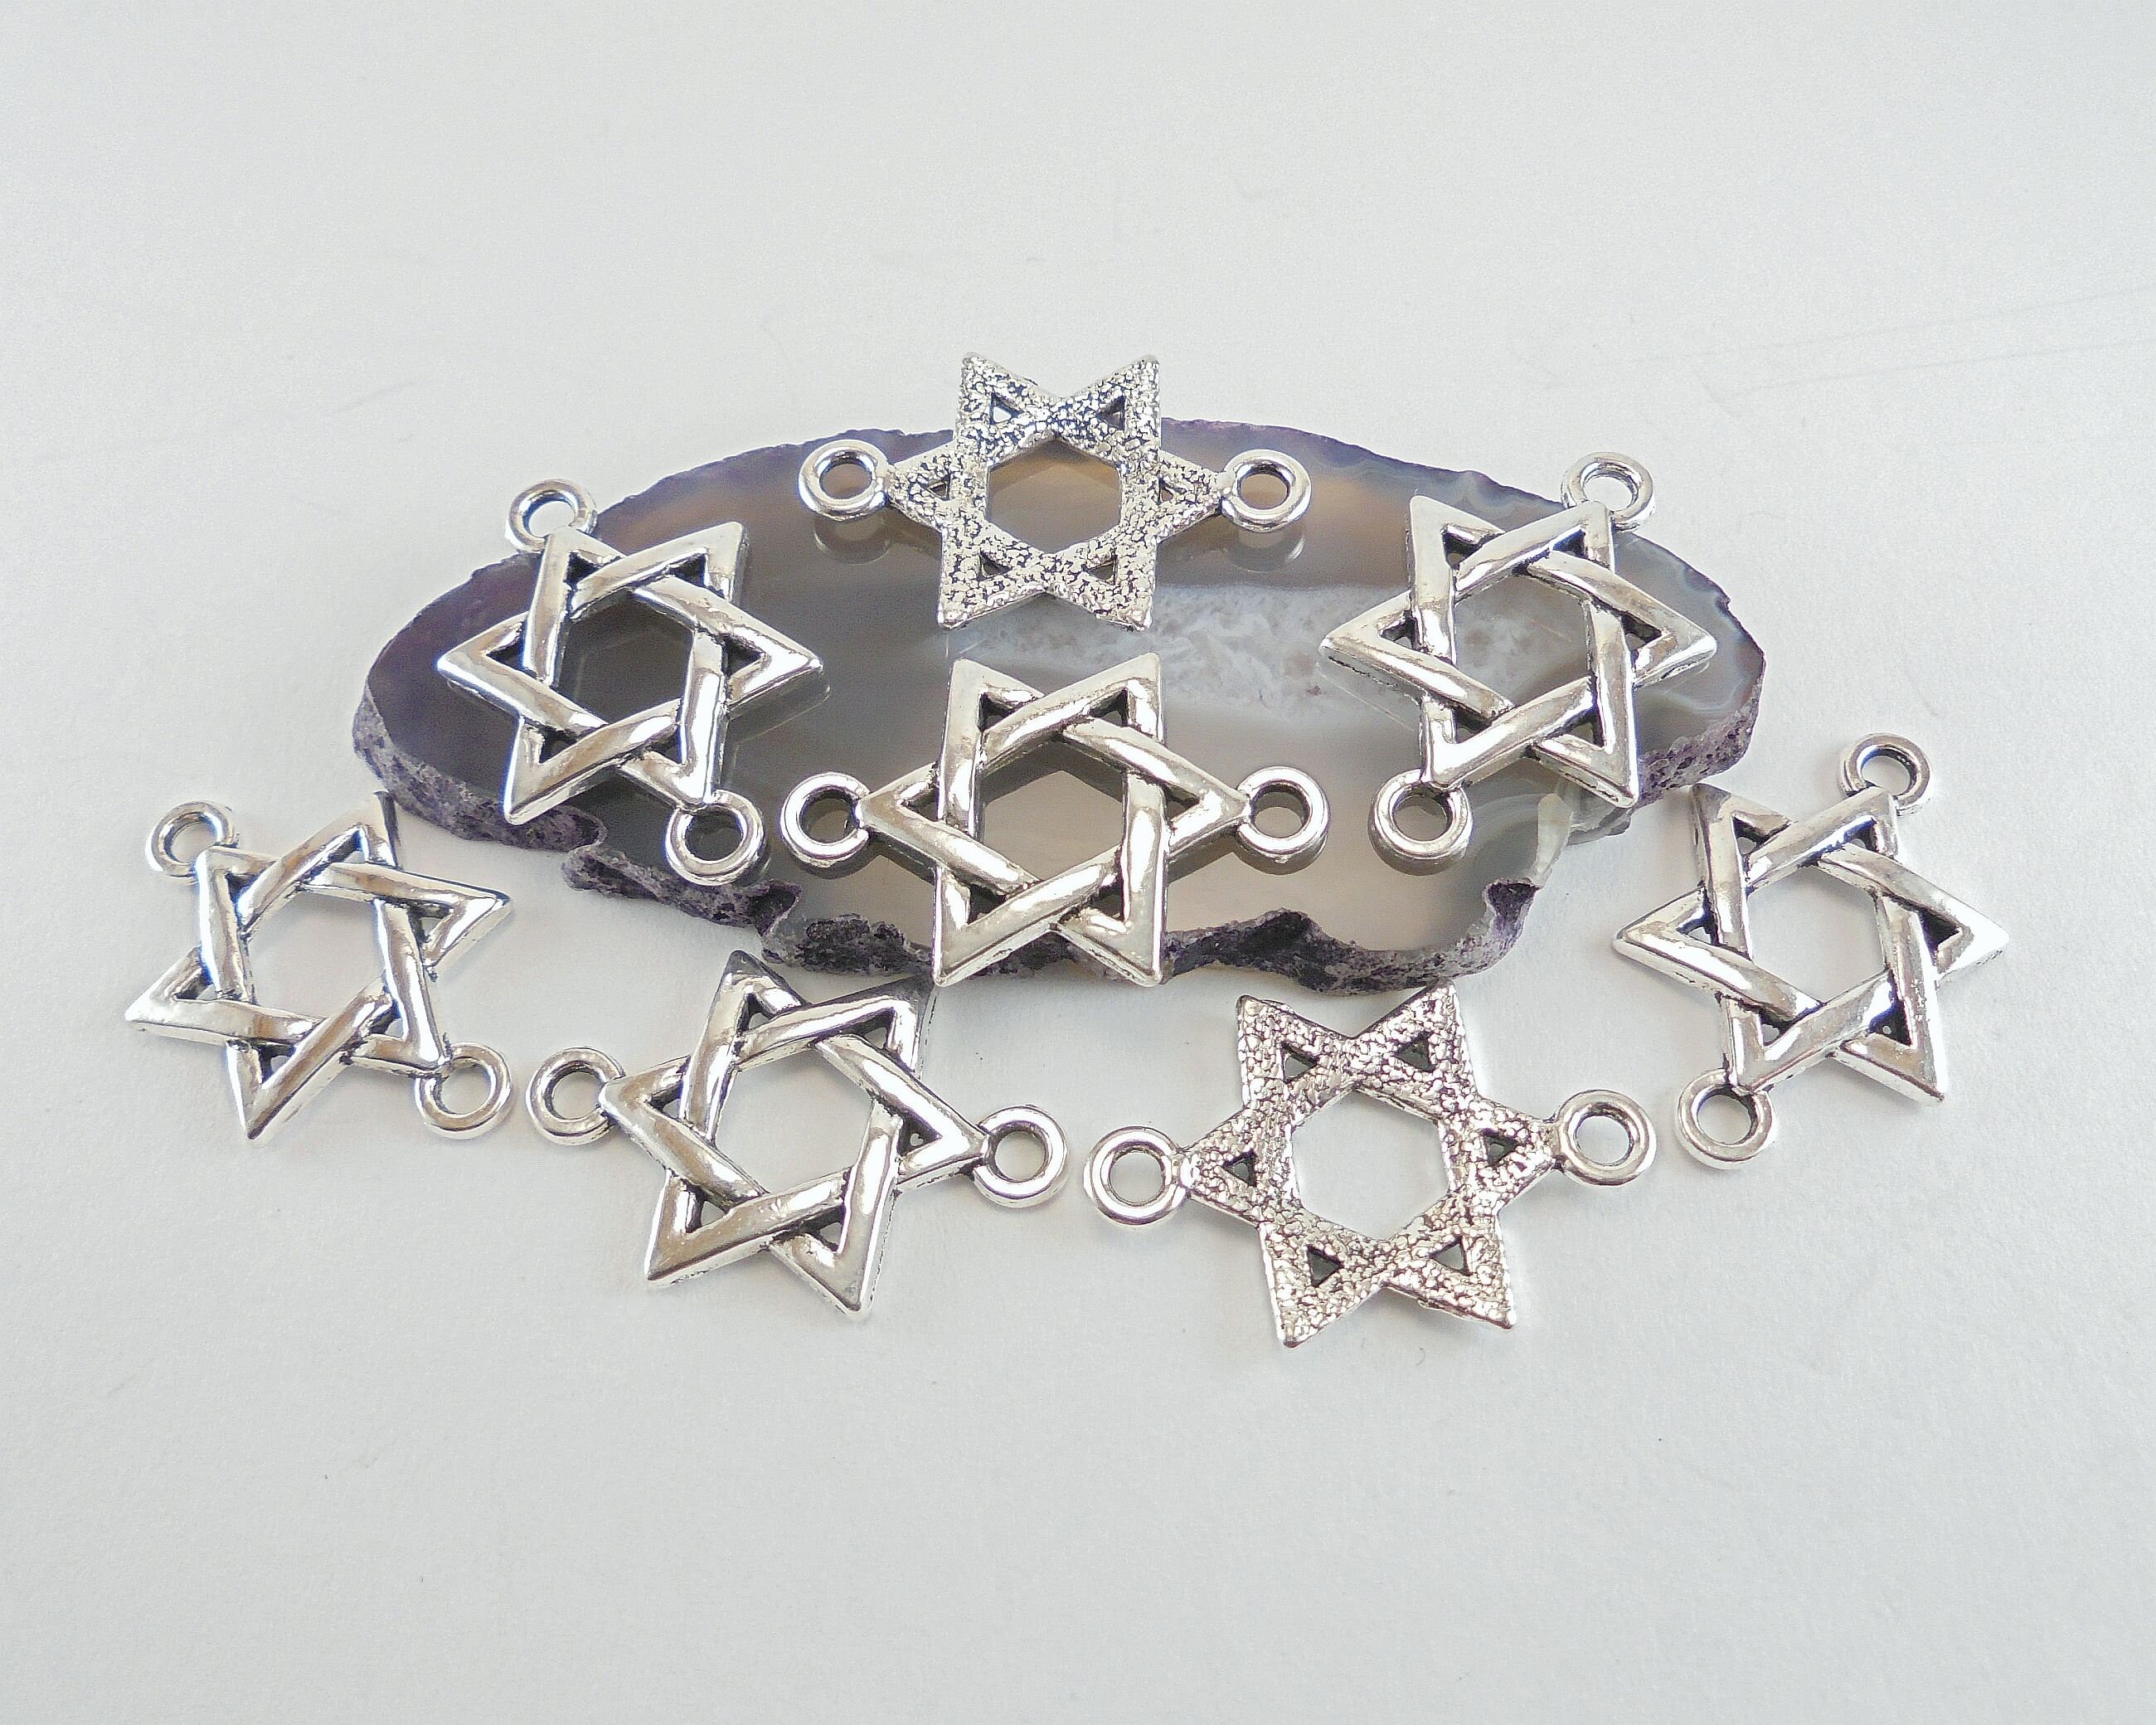 8 Star of David Connector Charms 26x17mm Antique Silver - Etsy